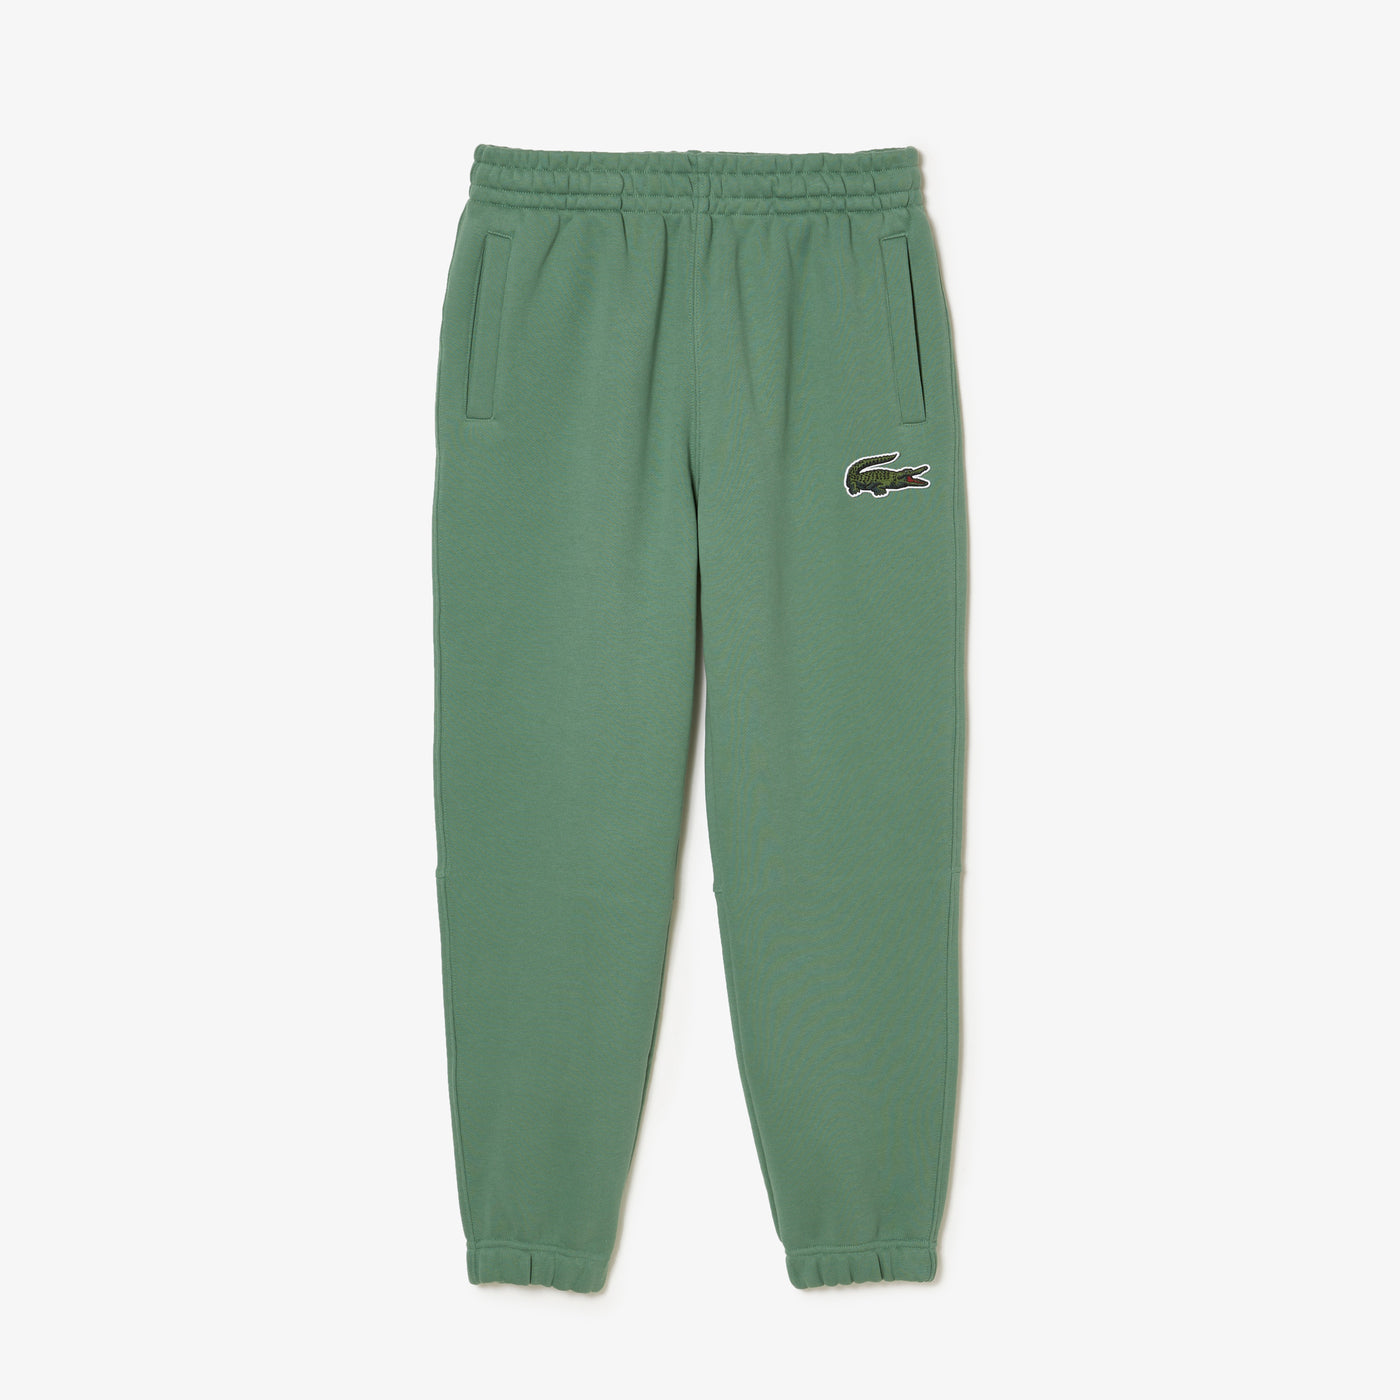 Shop The Latest Collection Of Lacoste Unisex Organic Cotton Fleece Trackpants - Xh0075 In Lebanon